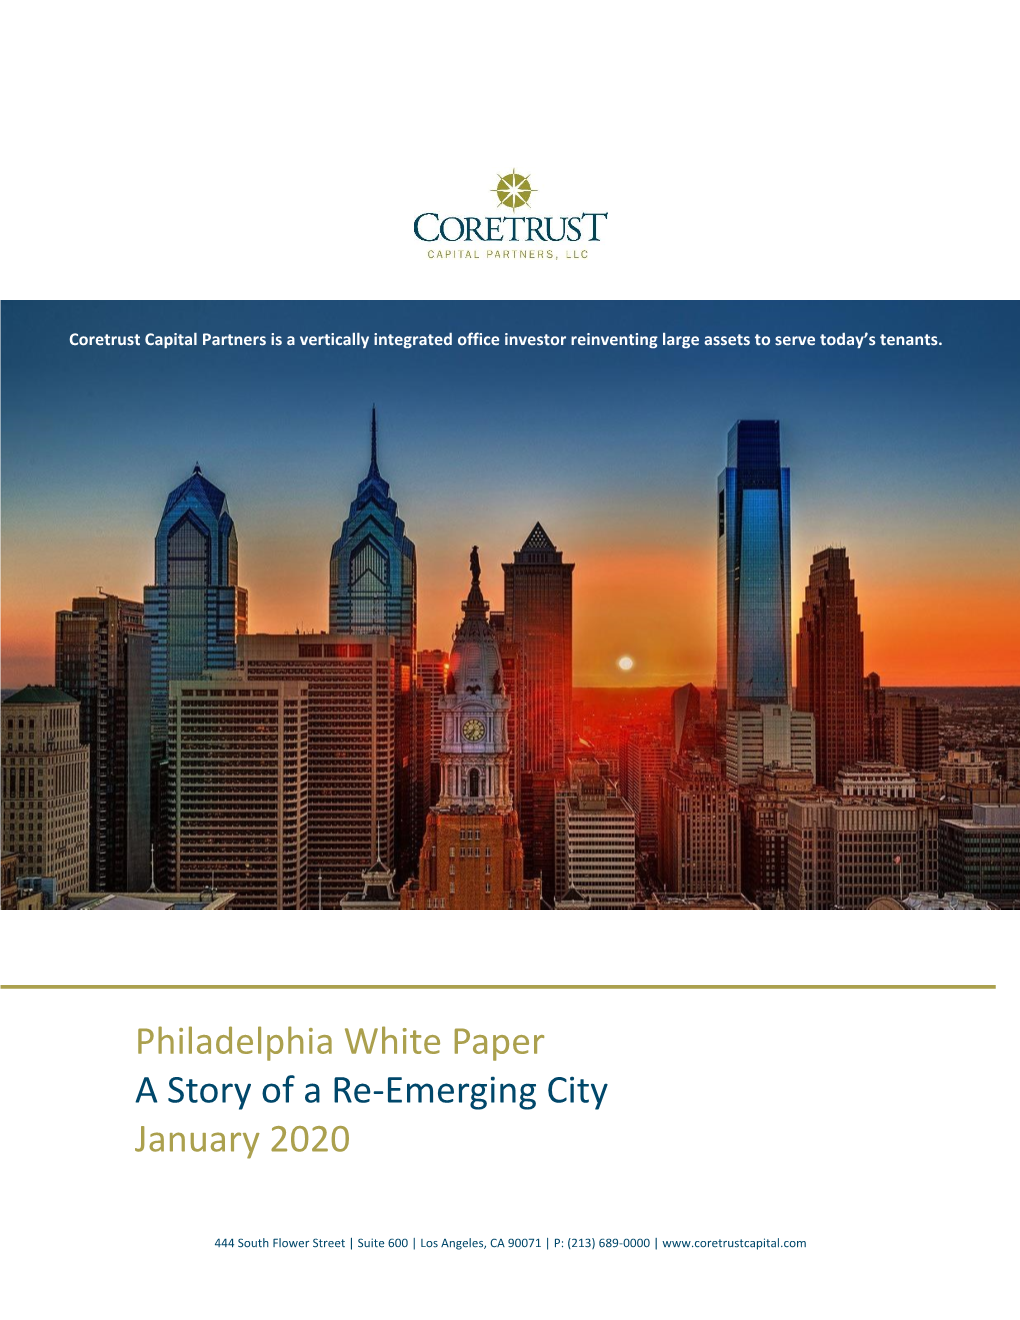 Philadelphia White Paper a Story of a Re-Emerging City January 2020